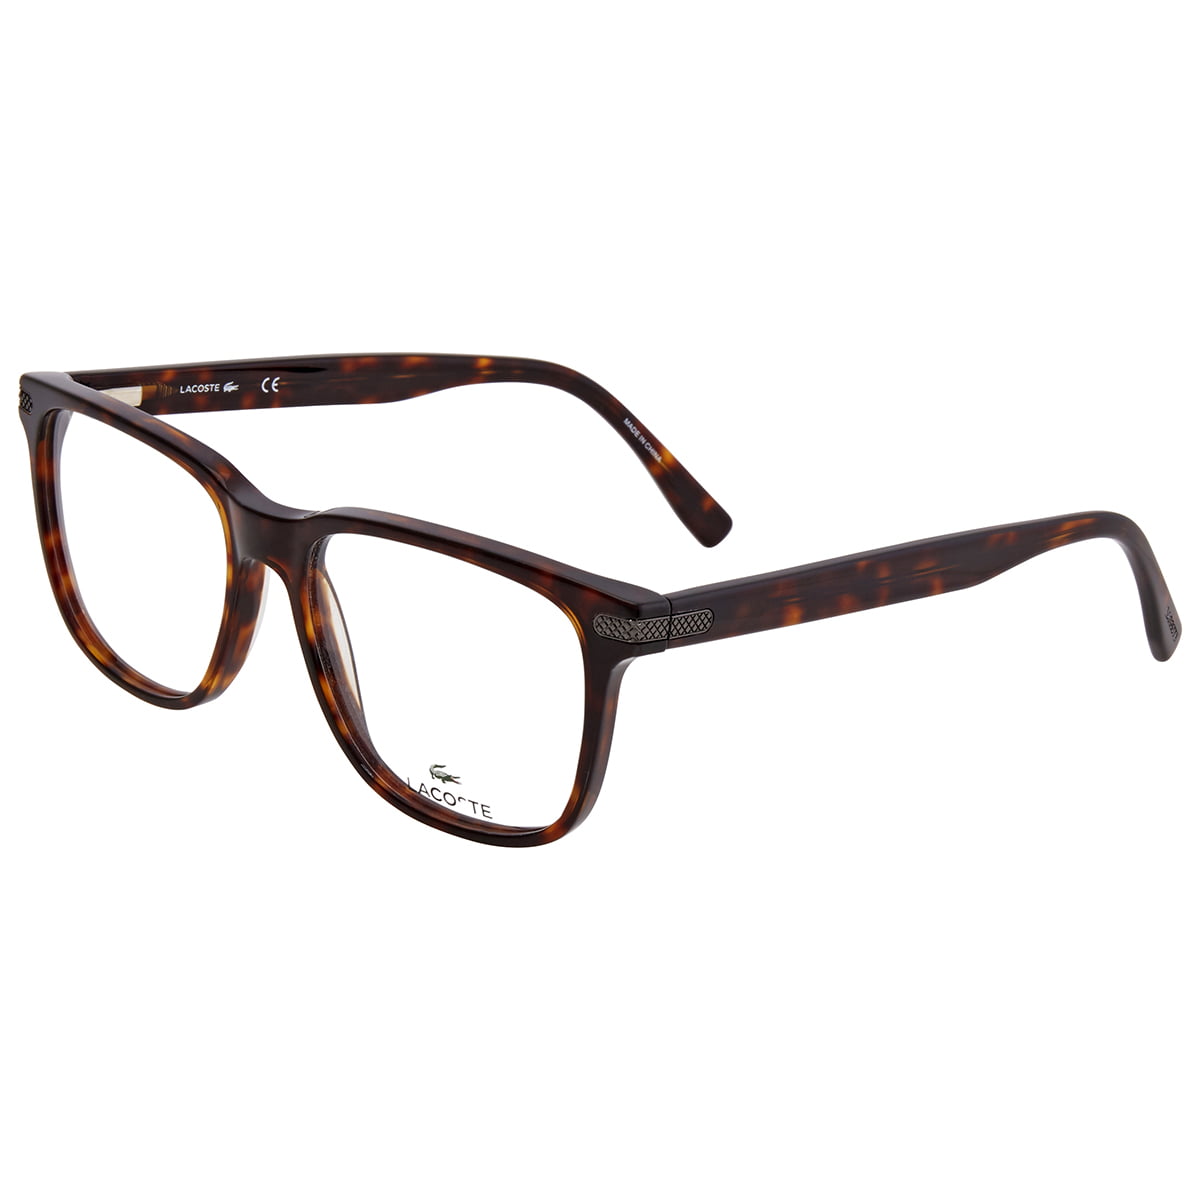 lacoste eye frames,Save up to 16%,www.ilcascinone.com